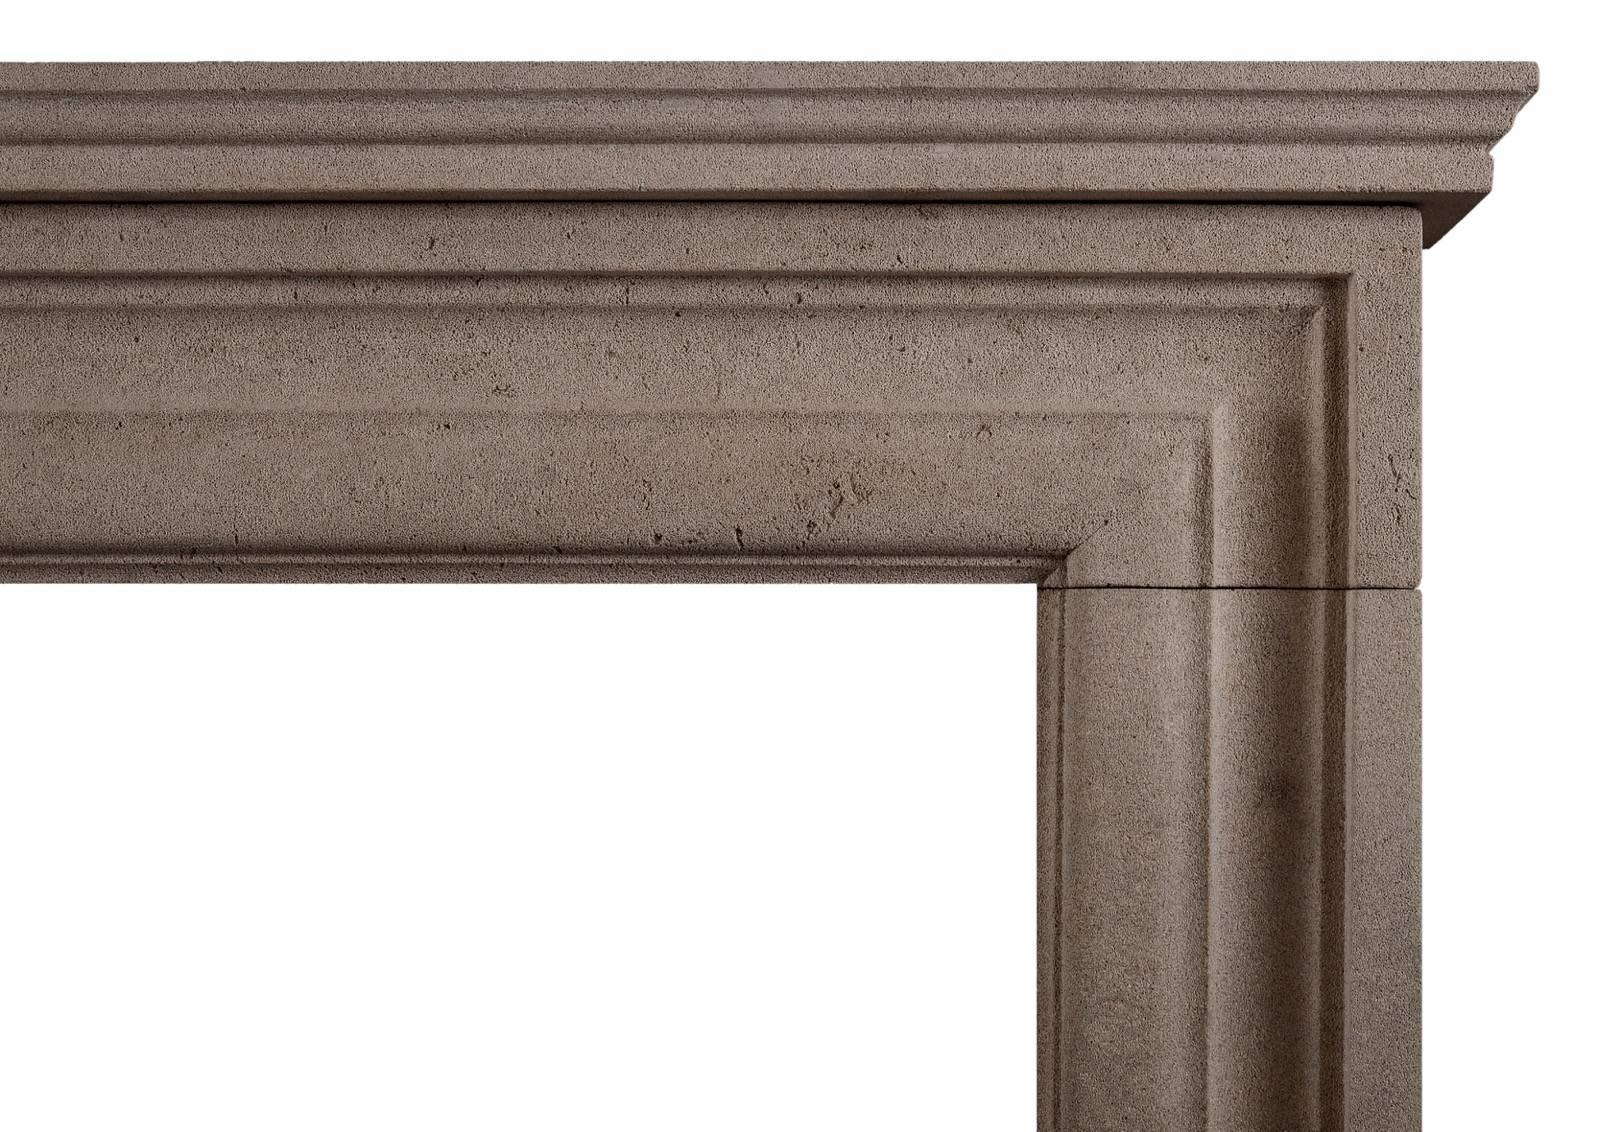 A small bolection fireplace in English bath stone. A scaled down version of a chimneypiece originally housed in the officer’s mess at Chelsea Barracks, London. Small-scale, suited for a smaller study or bedroom. Modern.


Measures:
Shelf Width:	1220